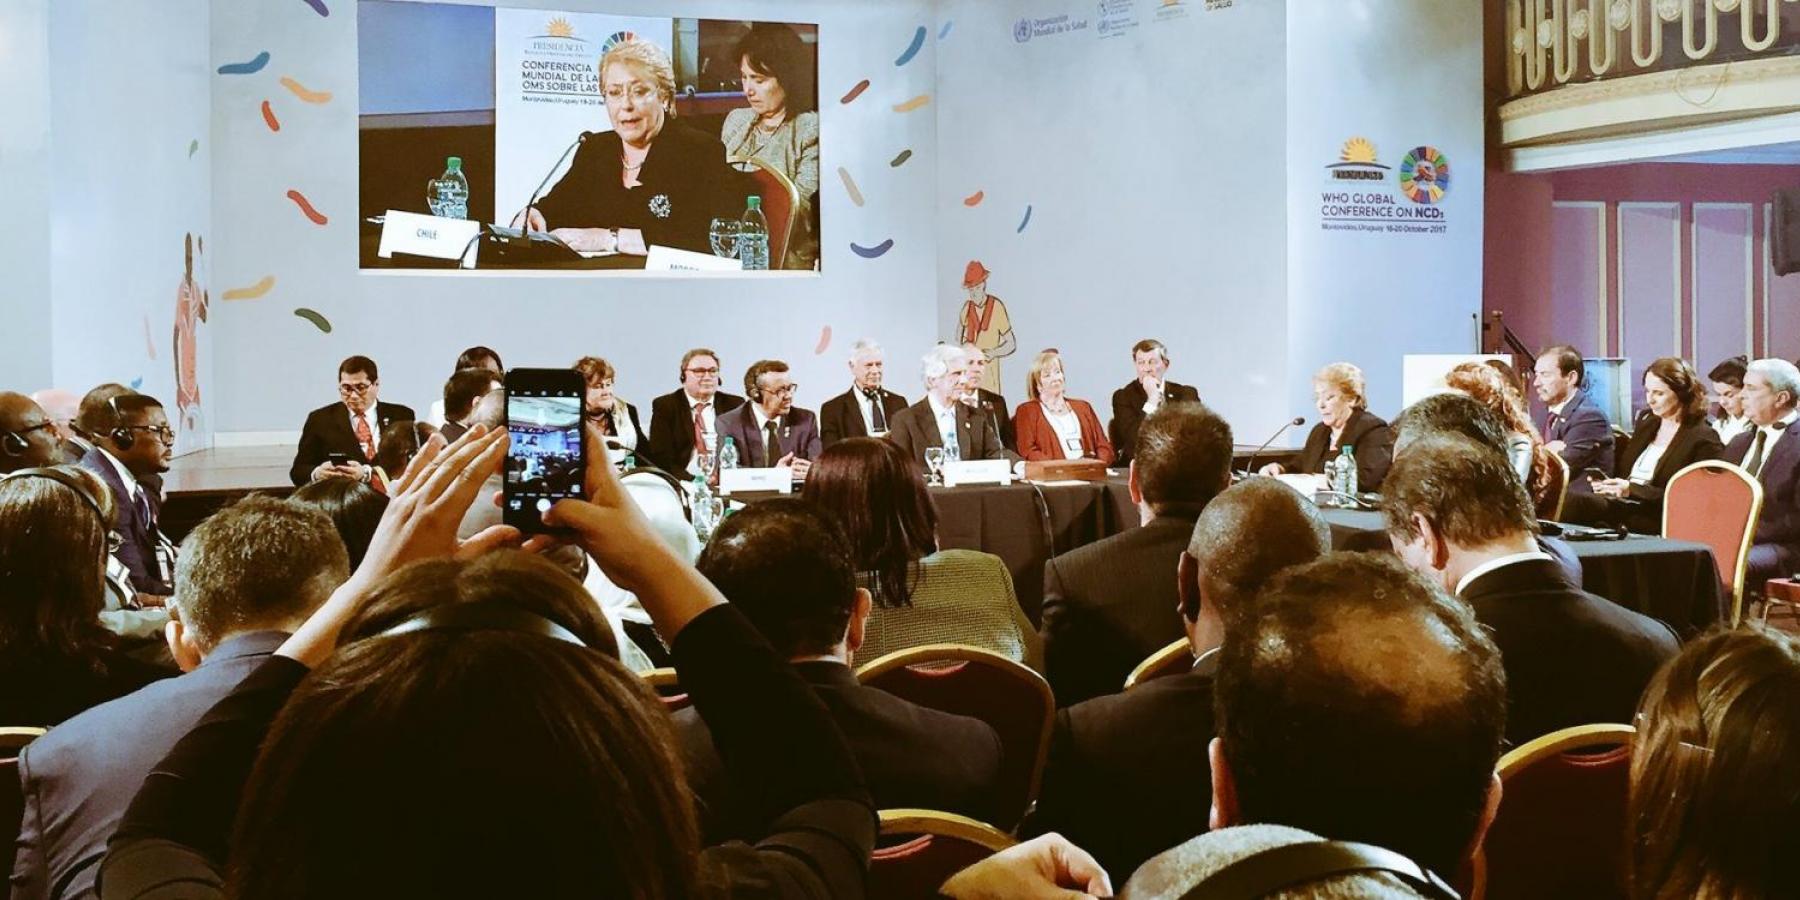 Chilean President Michelle Bachelet speaks at the Global conference on NCDs, Montevideo, Uruguay.